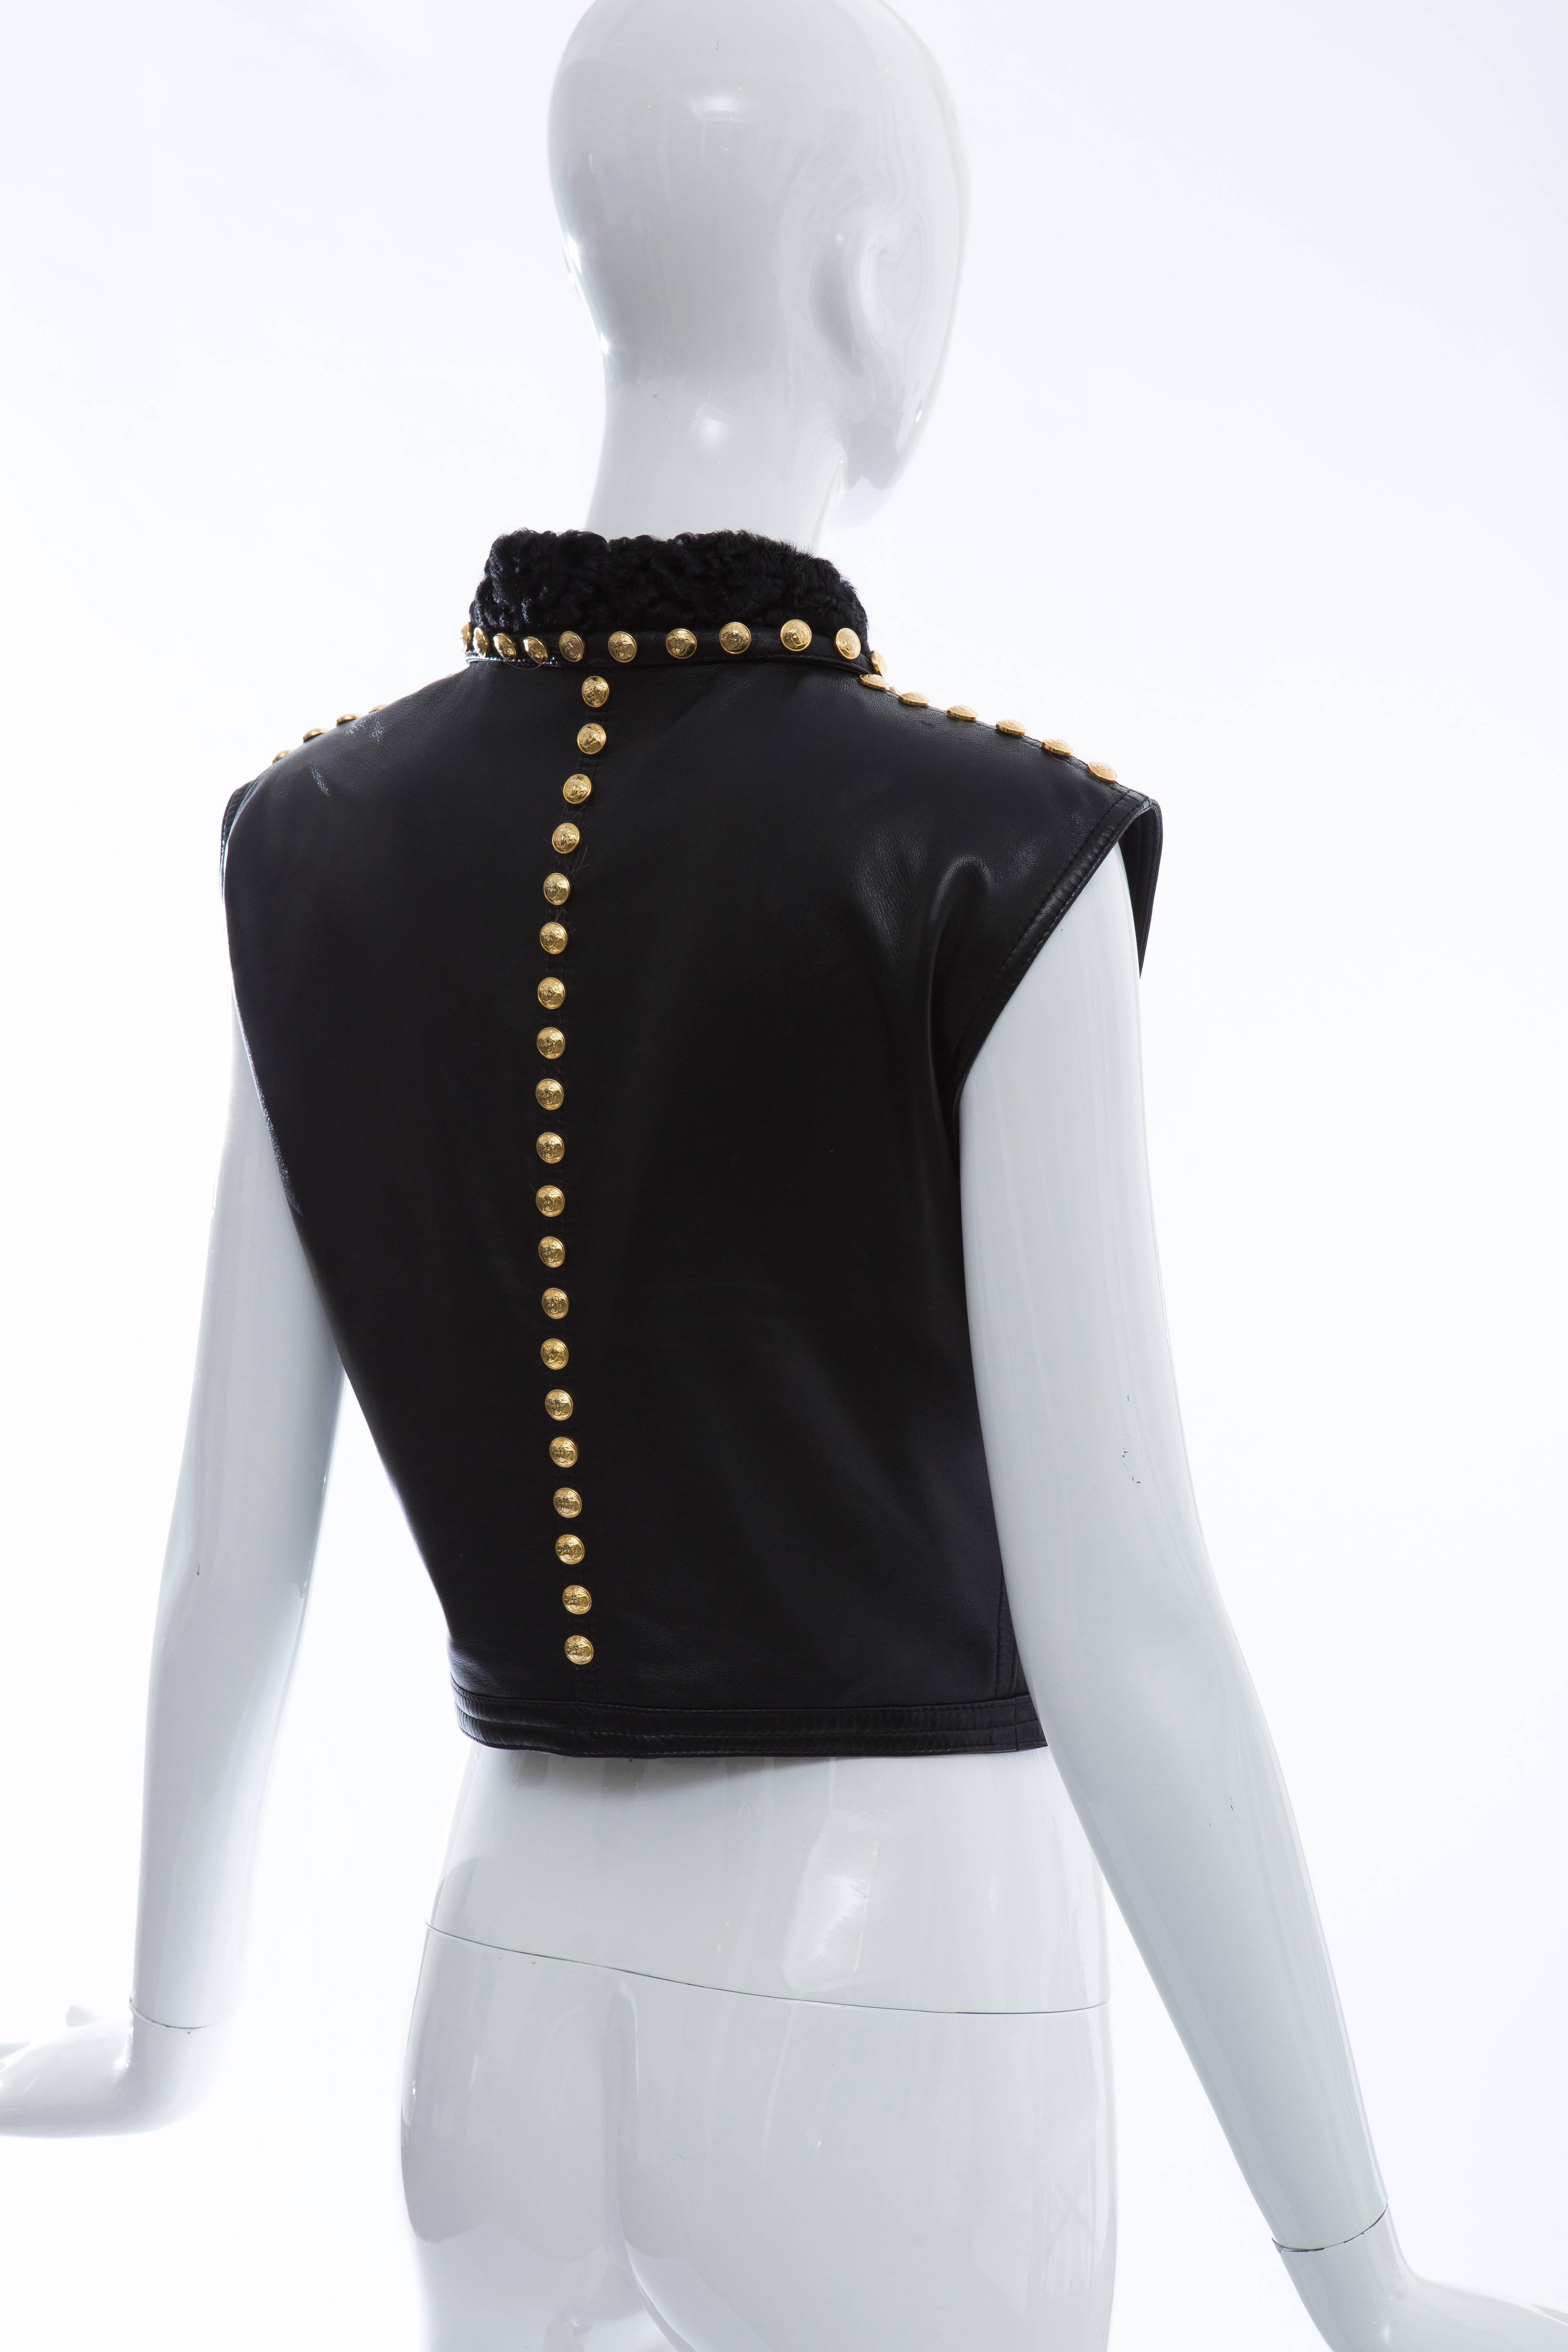 Gianni Versace Black Studded Leather Vest With Persian Lamb Collar, Circa 1990's 3